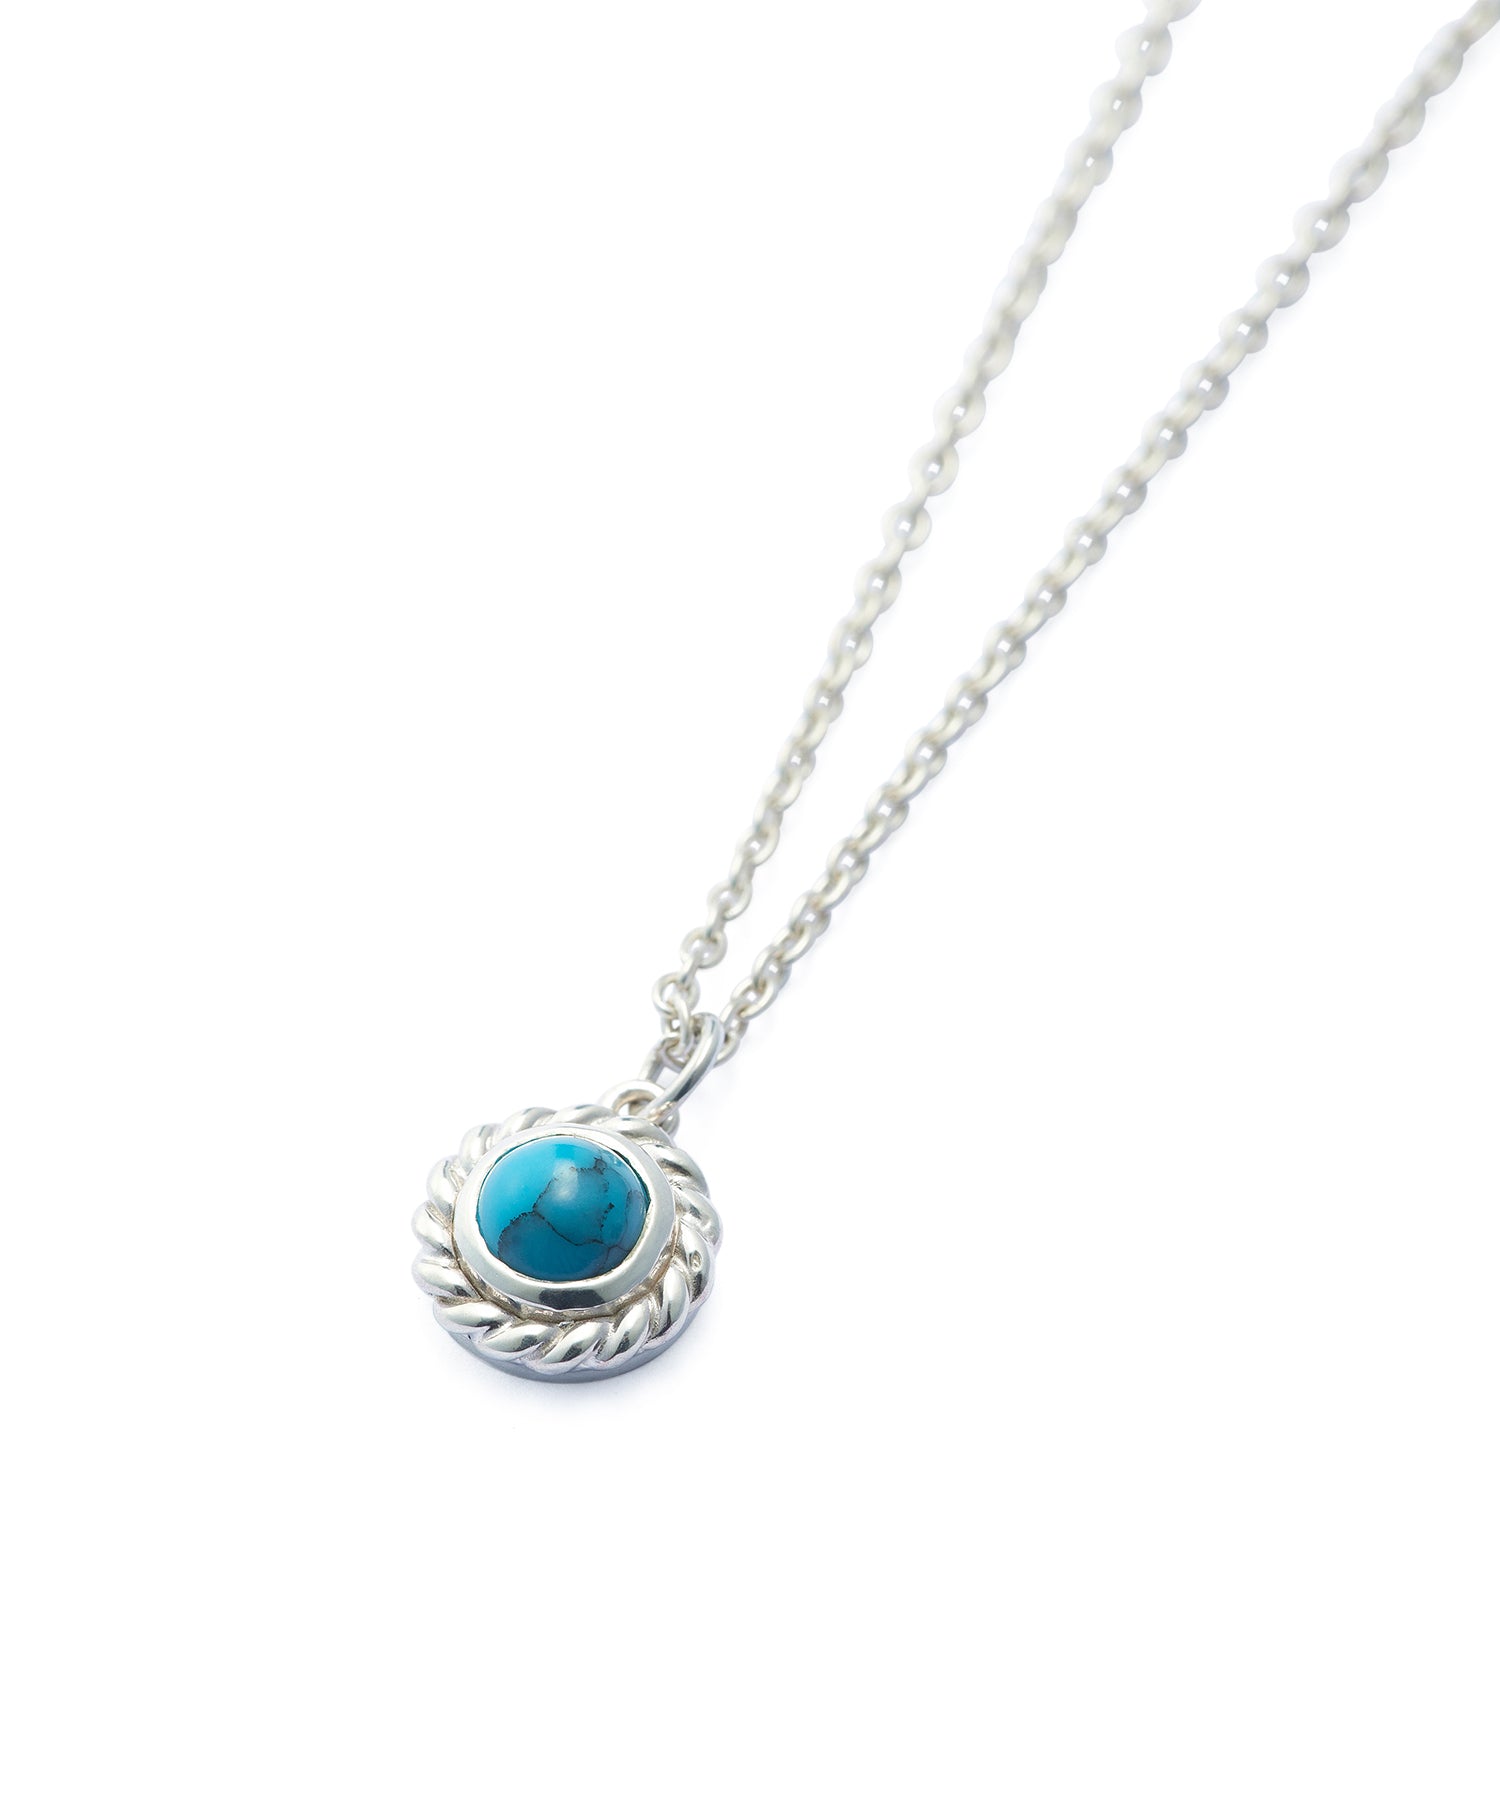 STONE SILVER NECKLACE